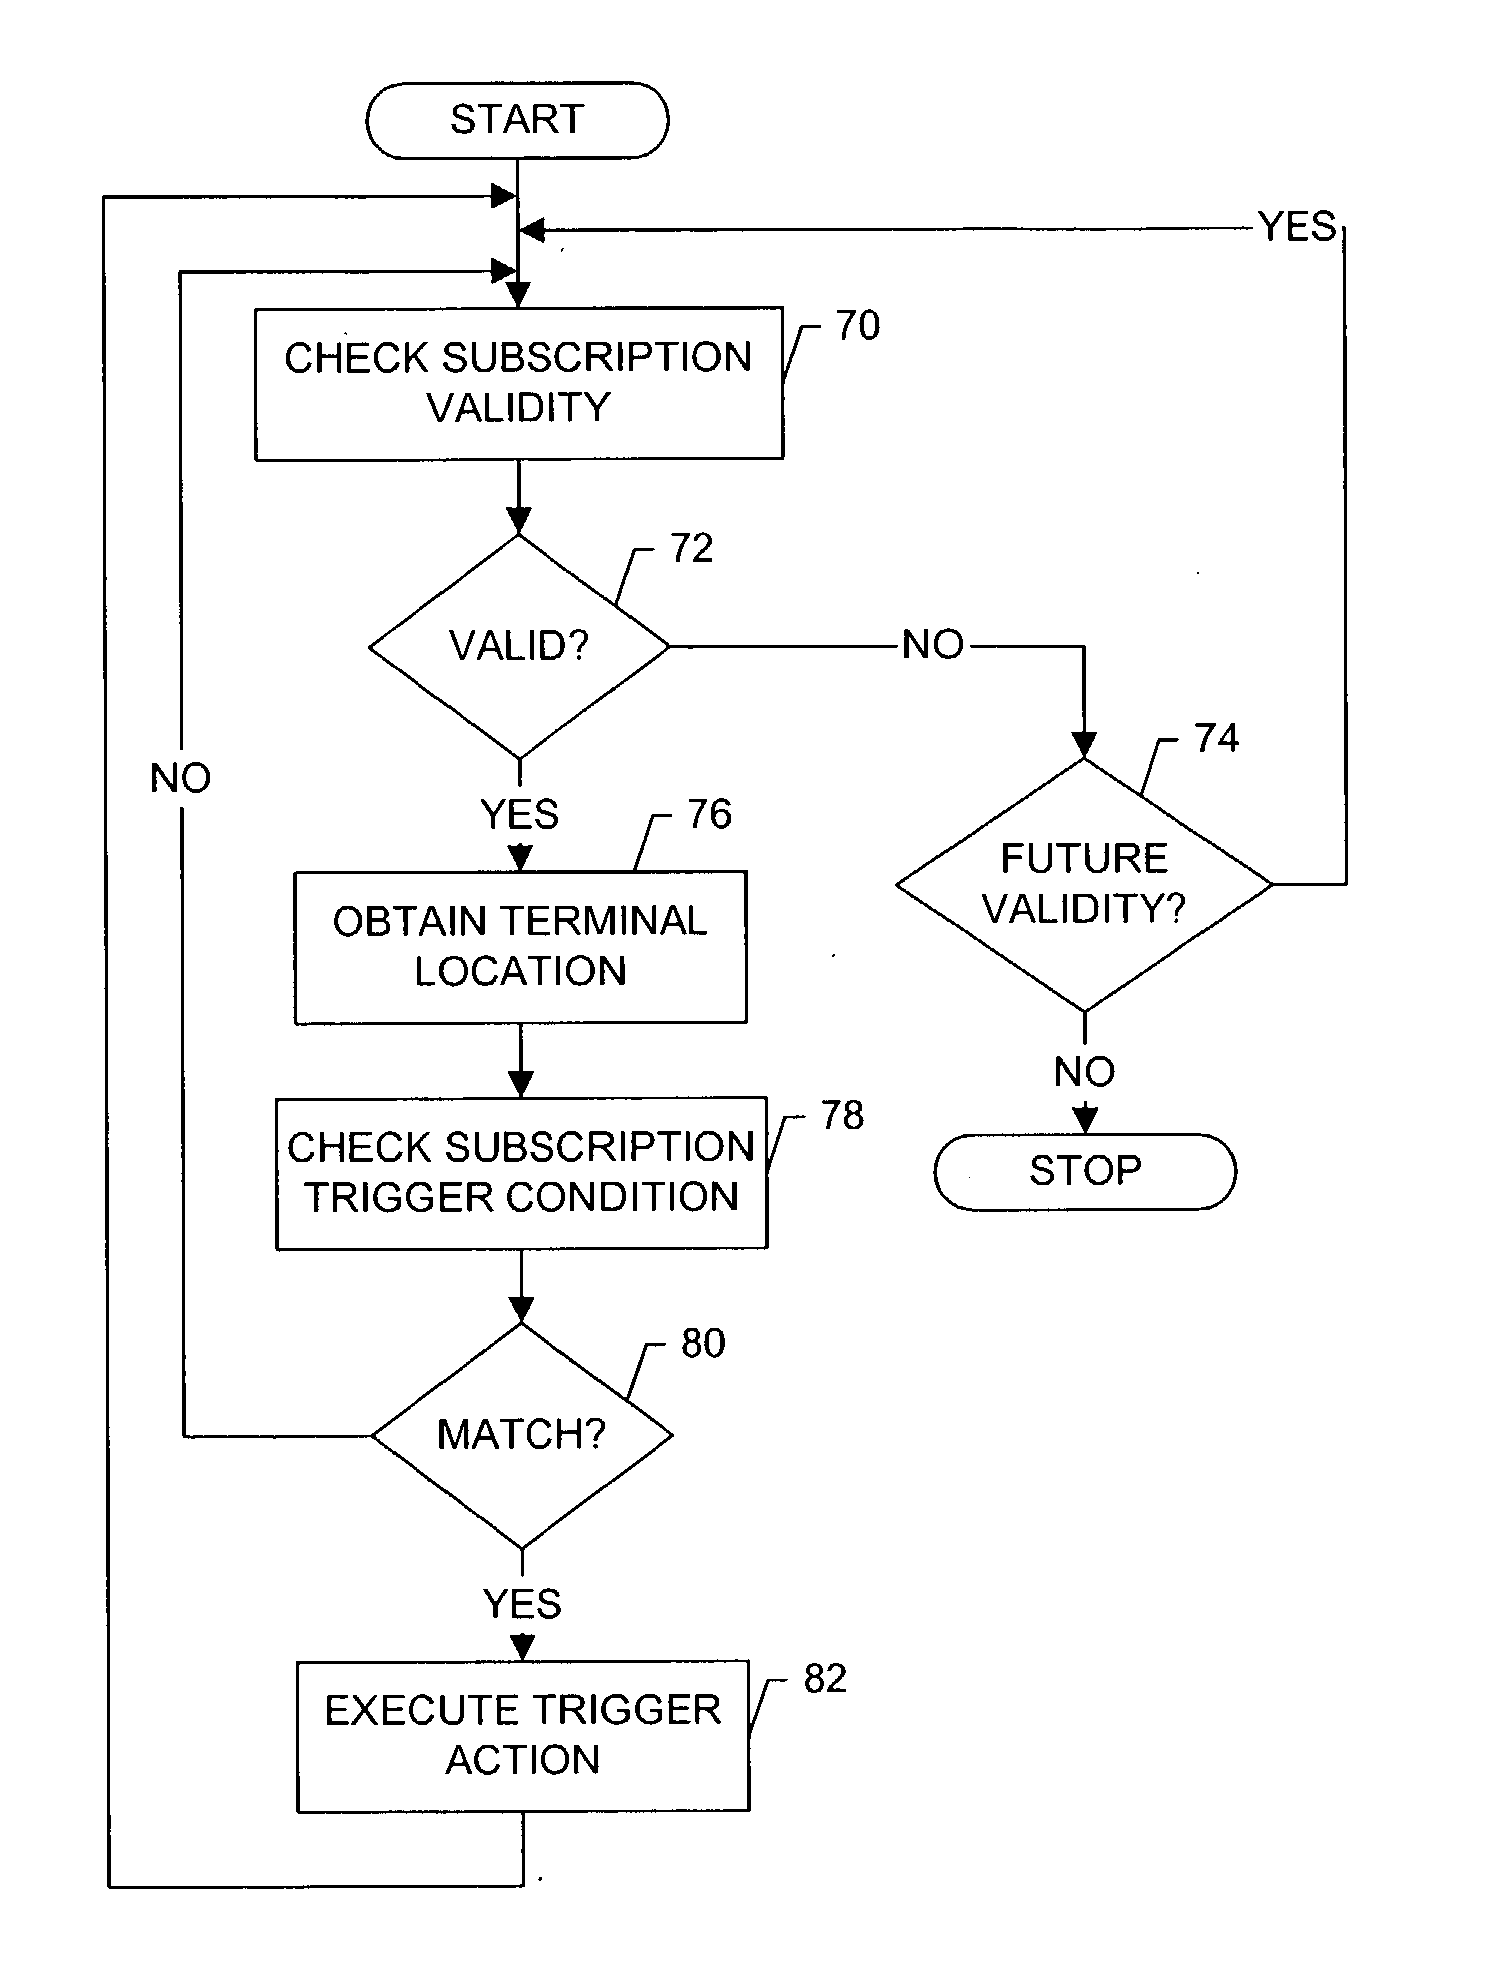 System, method and computer program product for providing differential location services with mobile-based location tracking